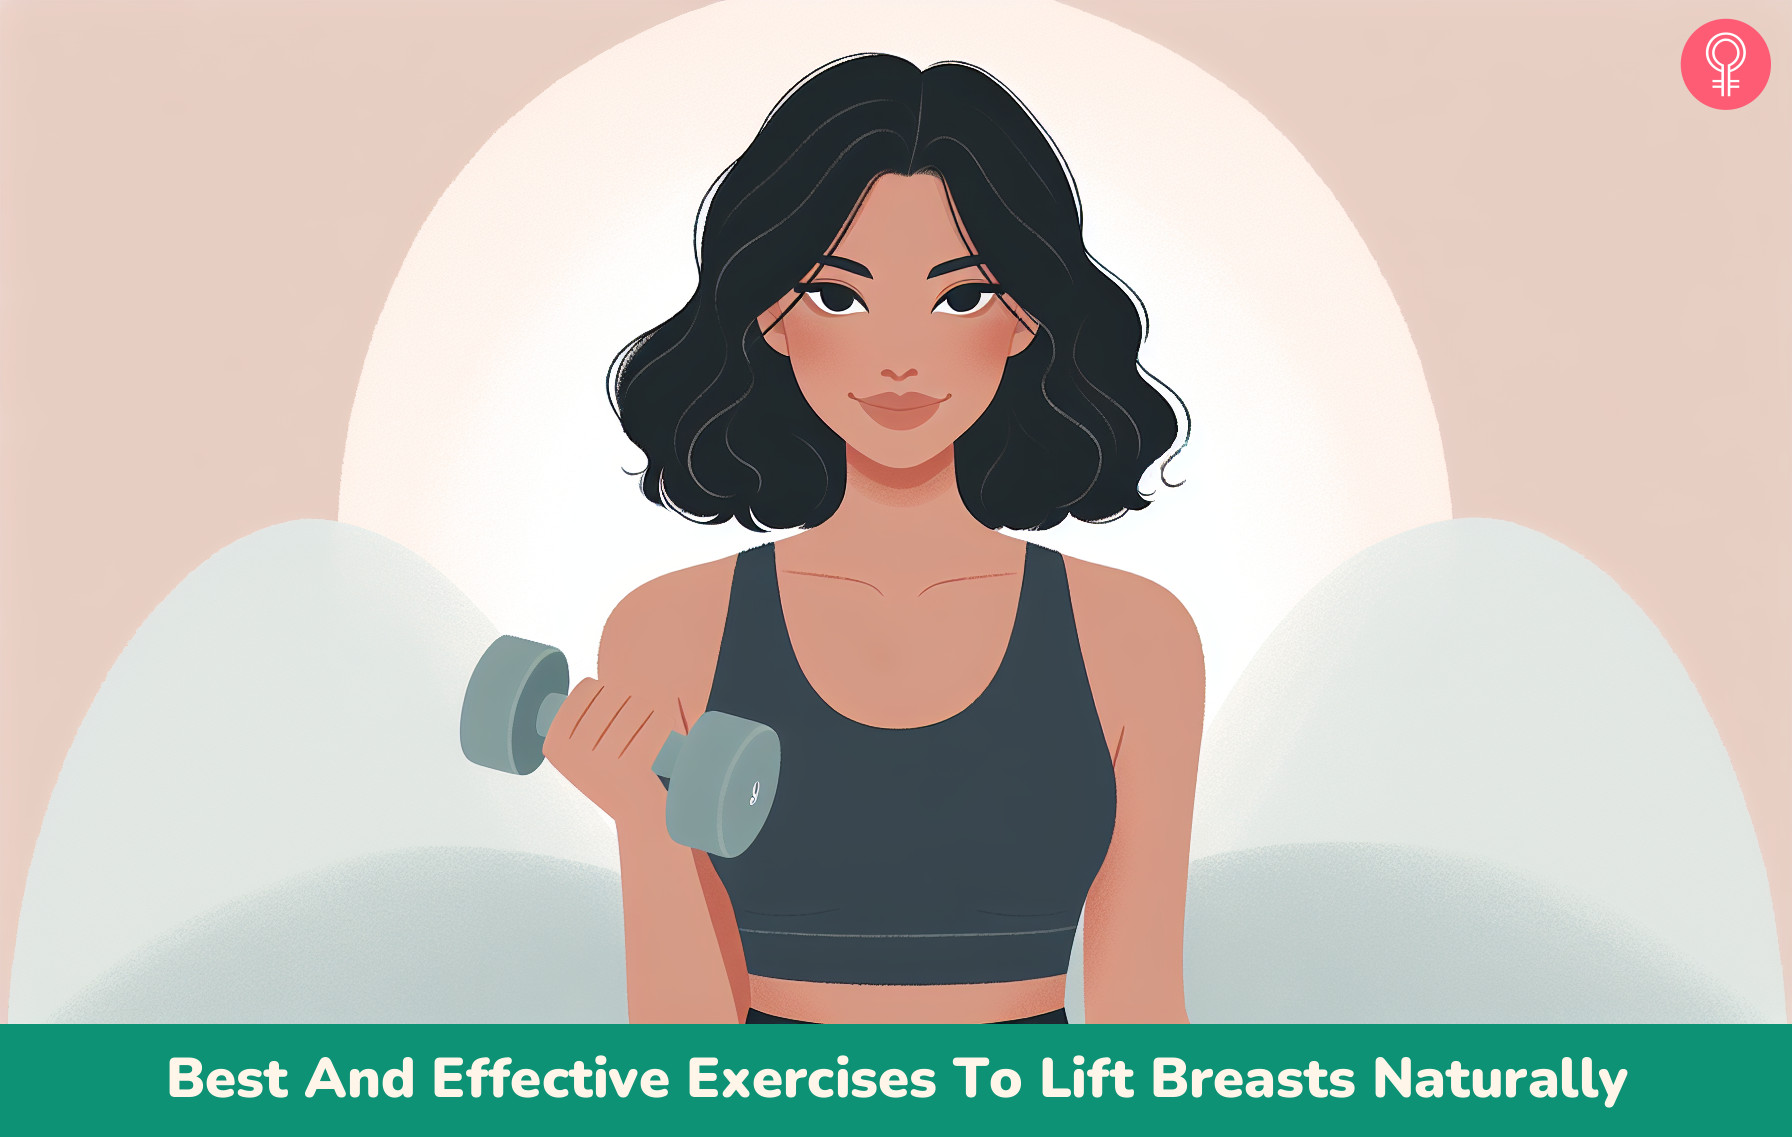 Give Your Girls a Lift: Quick Exercises for Perkier Breasts